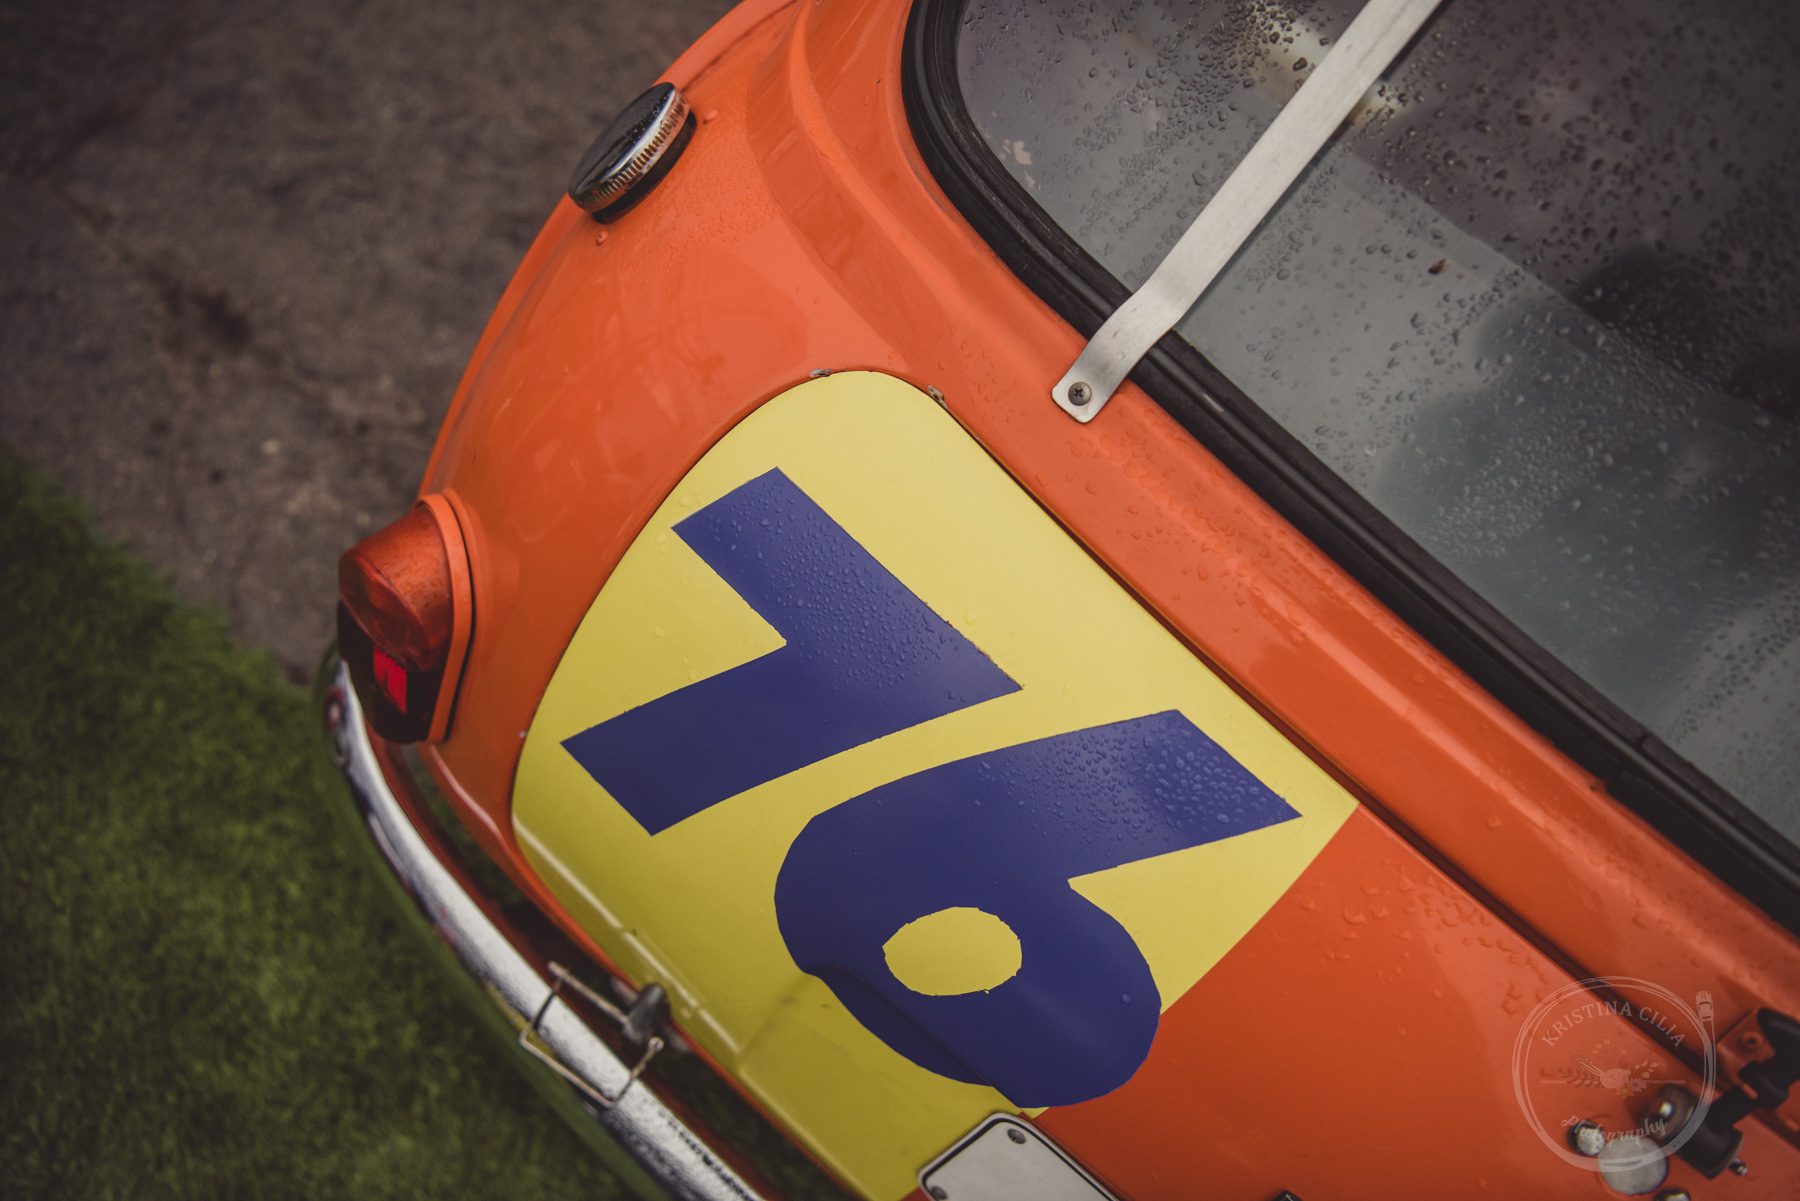 Bright colors make for a standout livery on track for this 1966 Austin Mini.